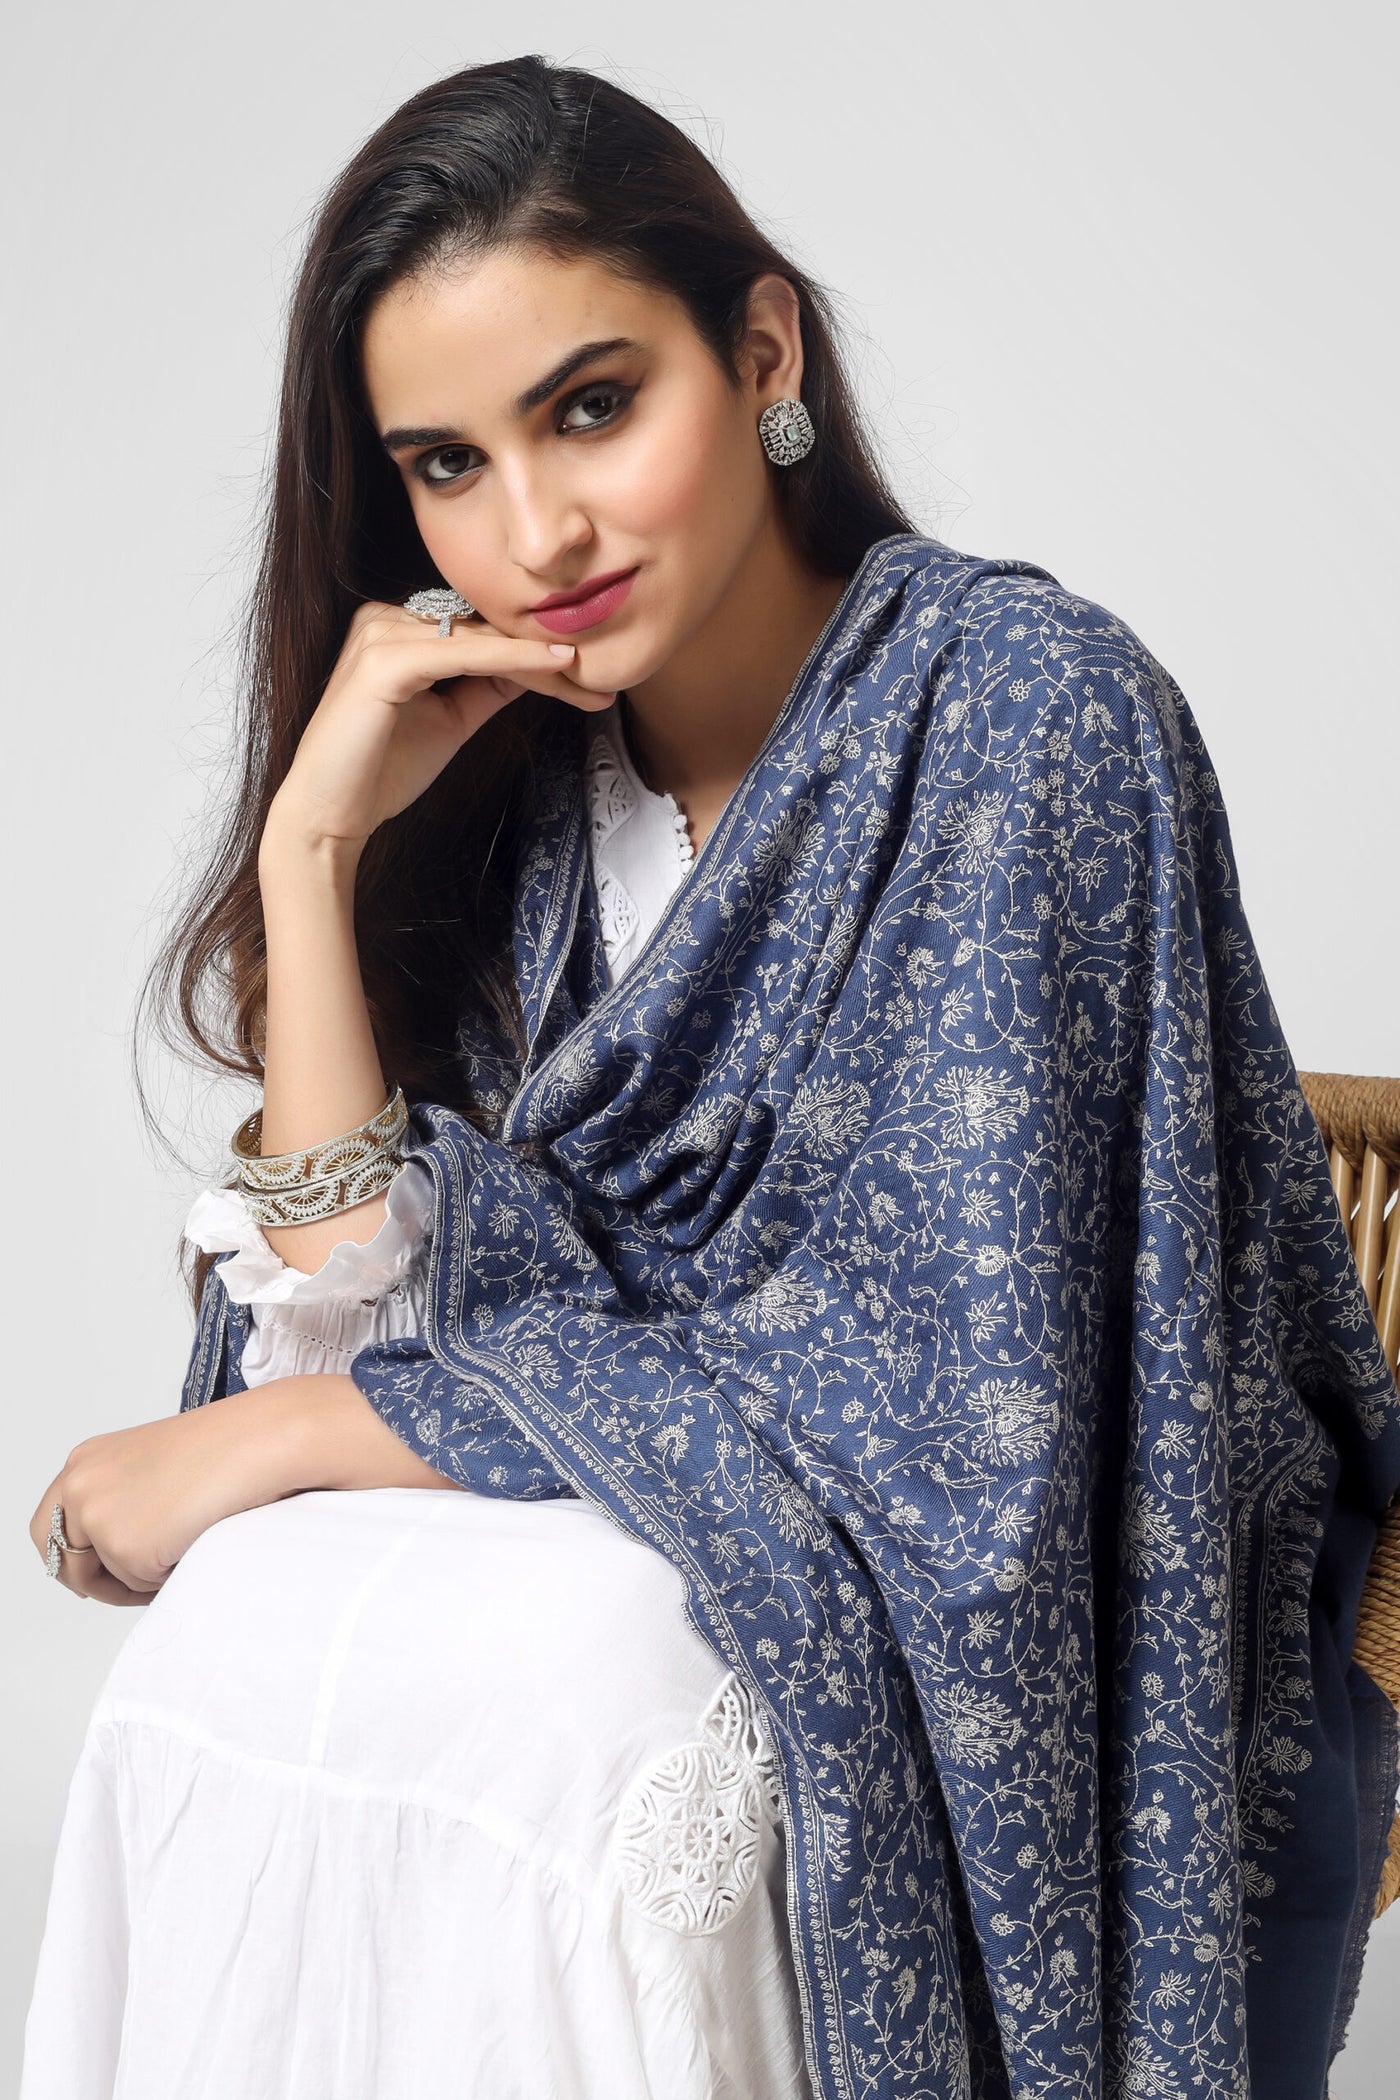 PASHMINA SHAWLS-  This gorgeous Light Purple Blue Pashmina Shawl, which has the renowned Sozni Embroidery in an intricate Jaldaar pattern, is the result of passion and dedication. the item has a magnificent and one-of-a-kind appearance. A collection of this elegant shawl is essential for any fashion enthusiast.